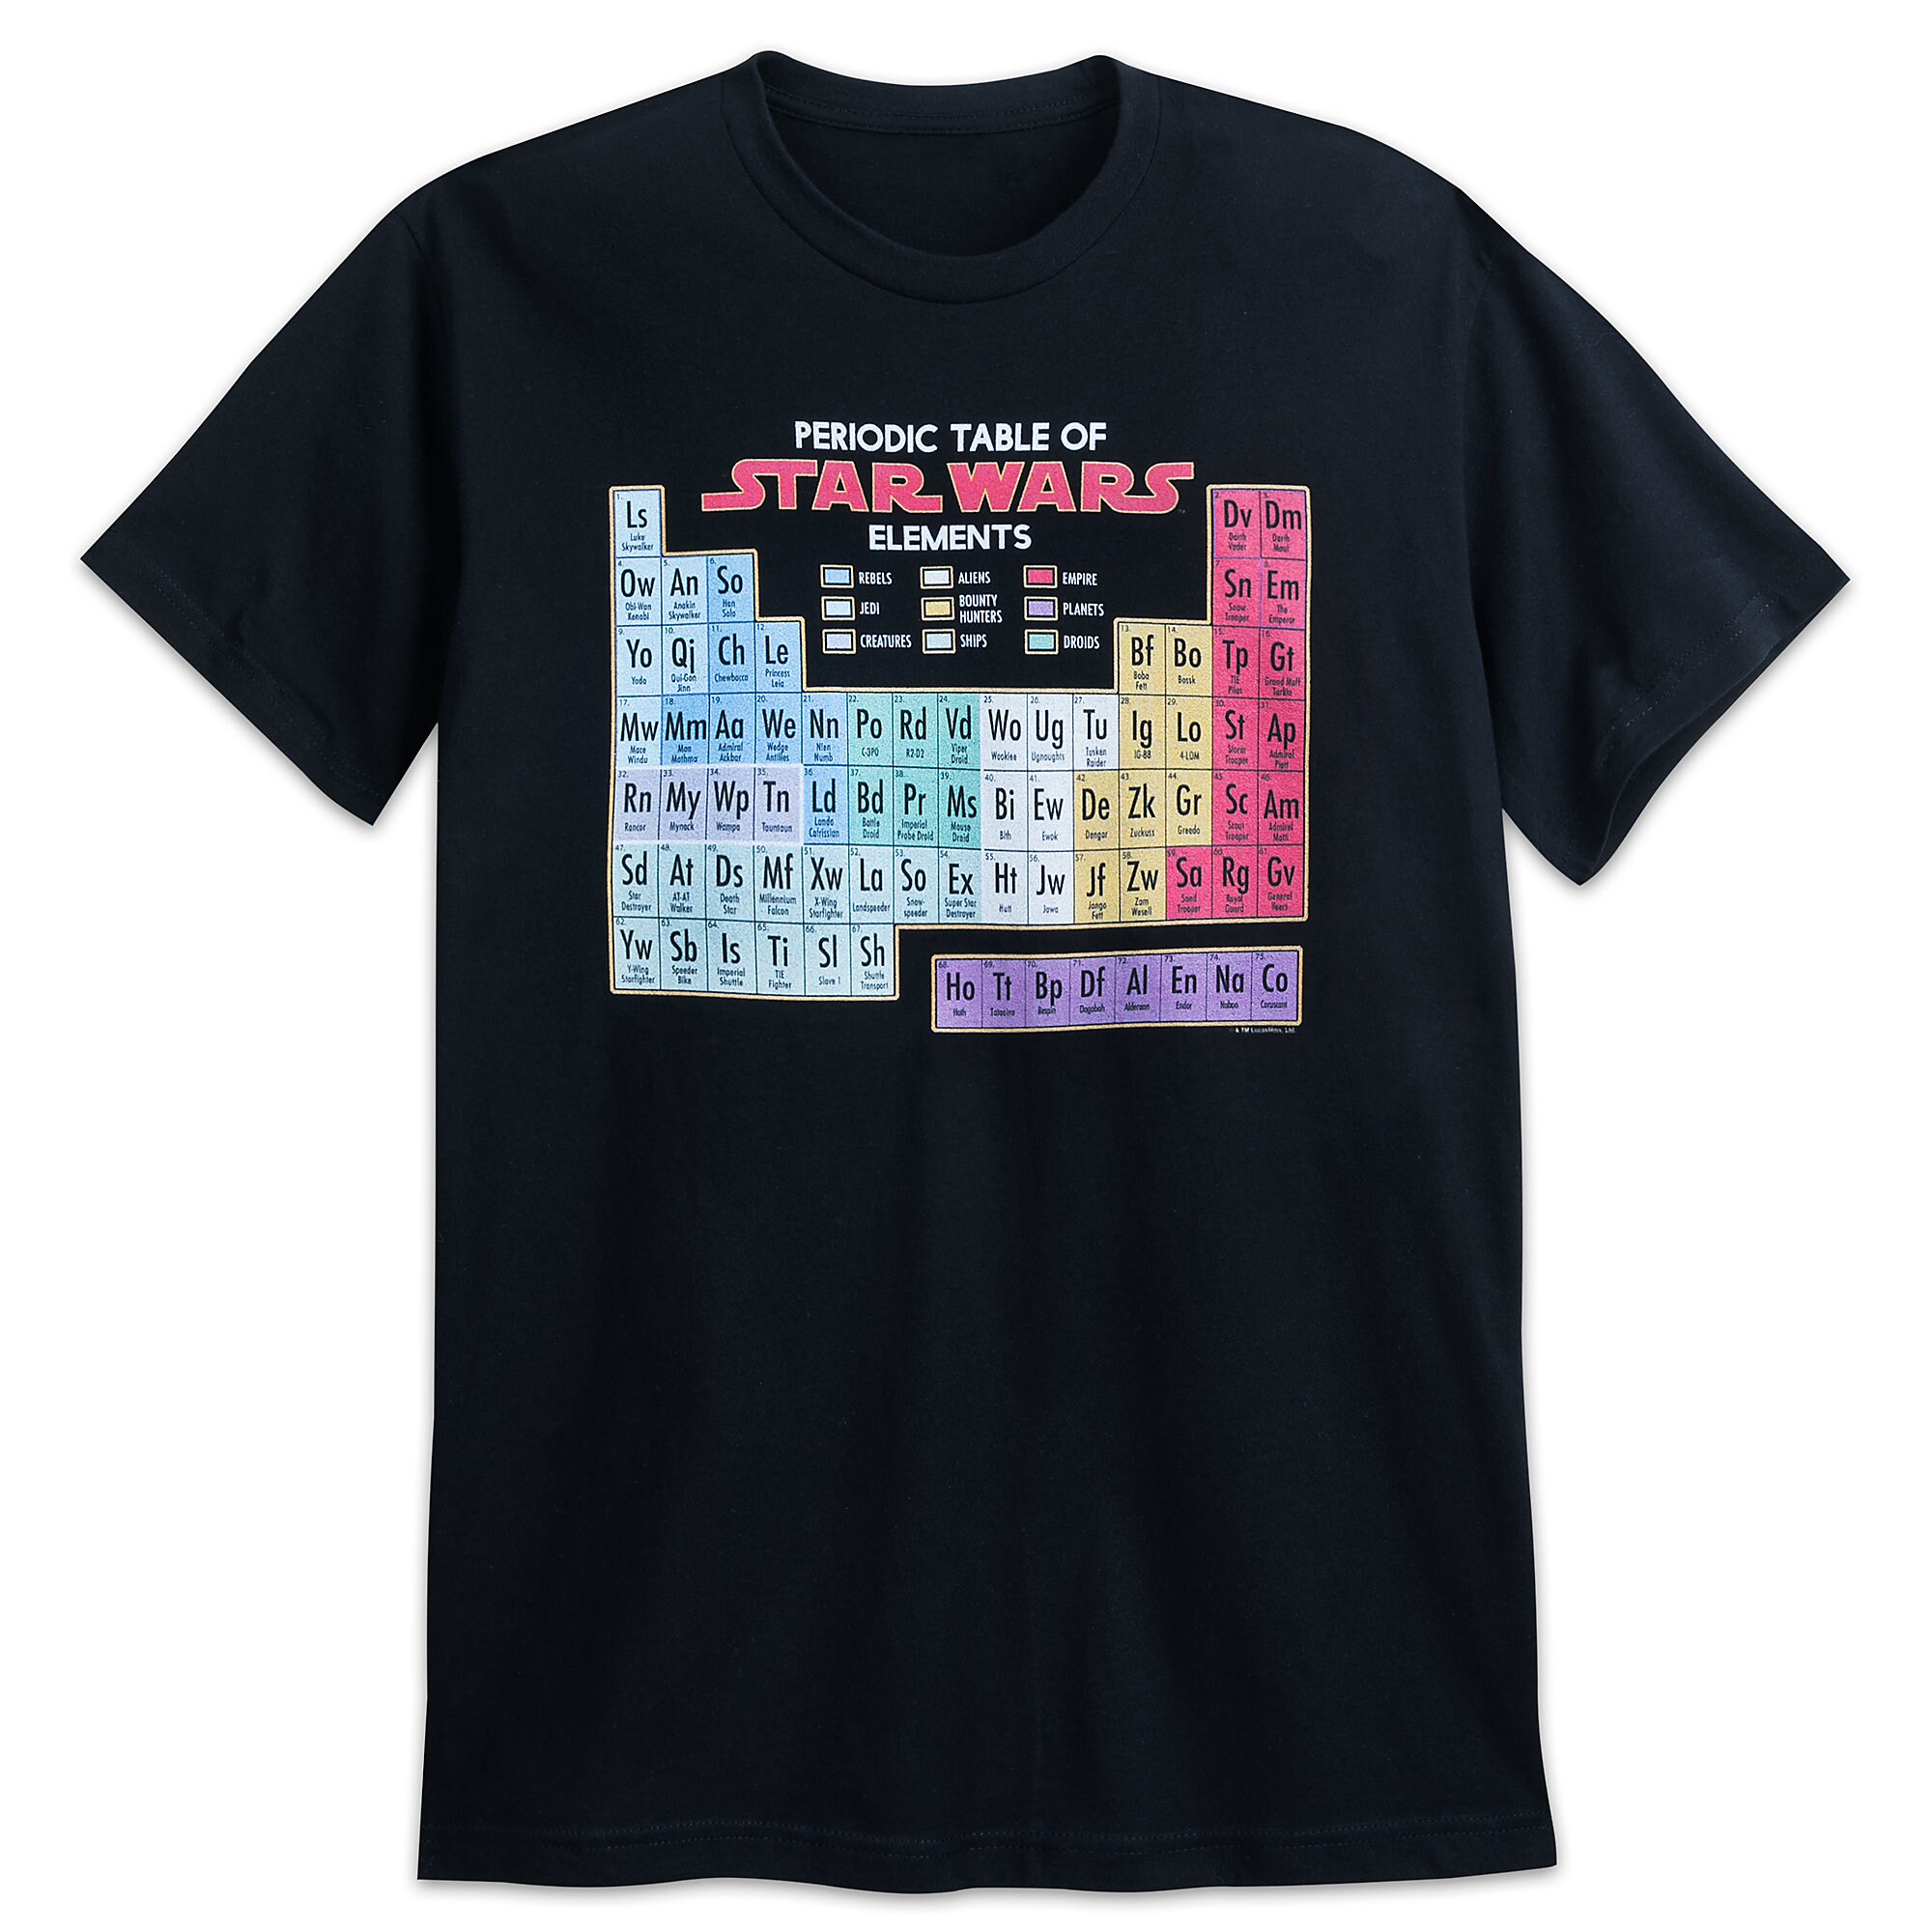 Star Wars Periodic Table of Elements T-Shirt for Men